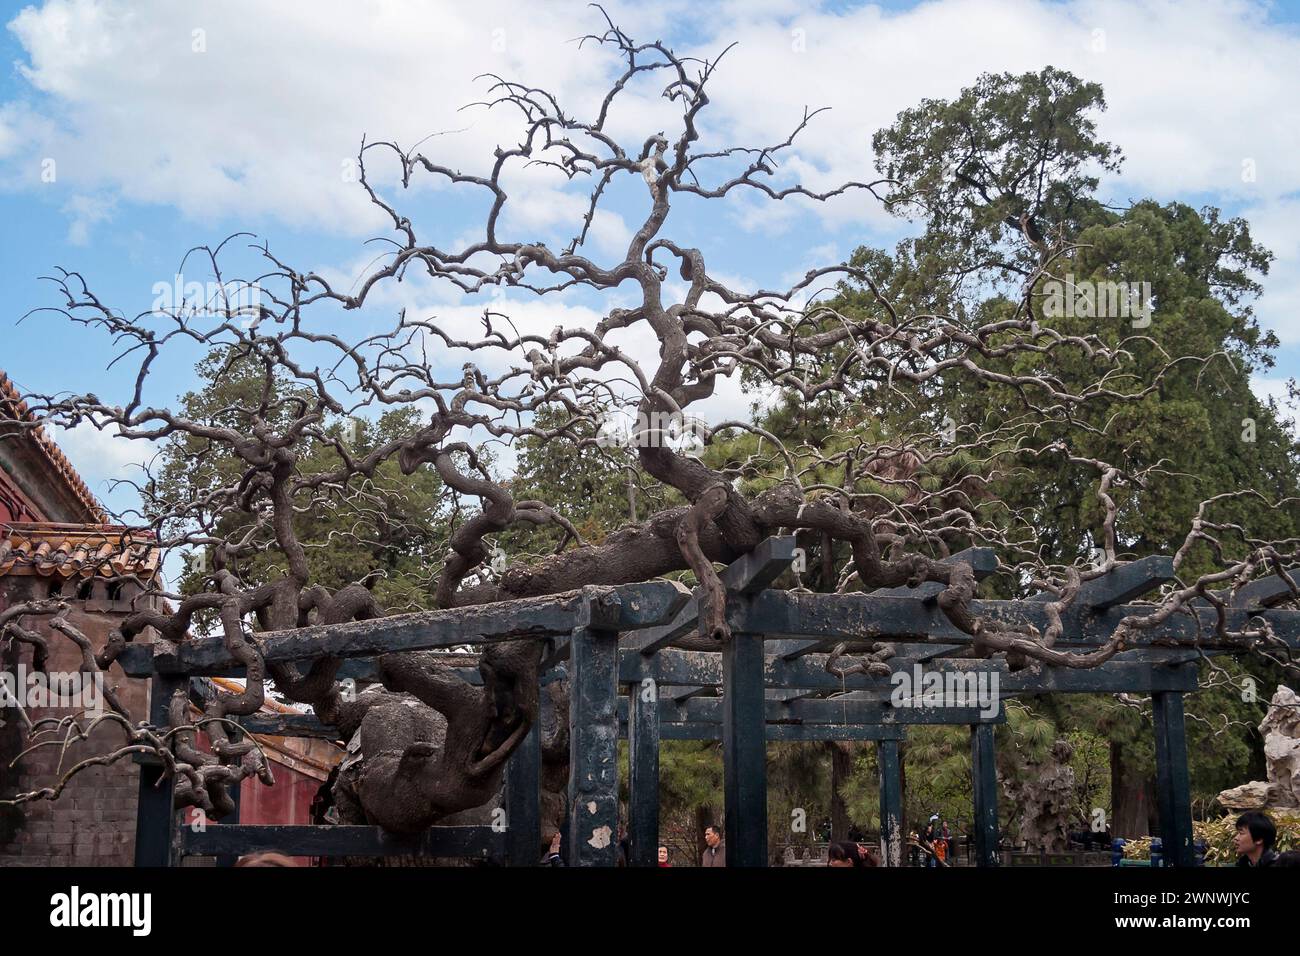 Huge Chinese Pagoda Tree in the Forbidden City, Beijing, China on 1 April 2011 Stock Photo